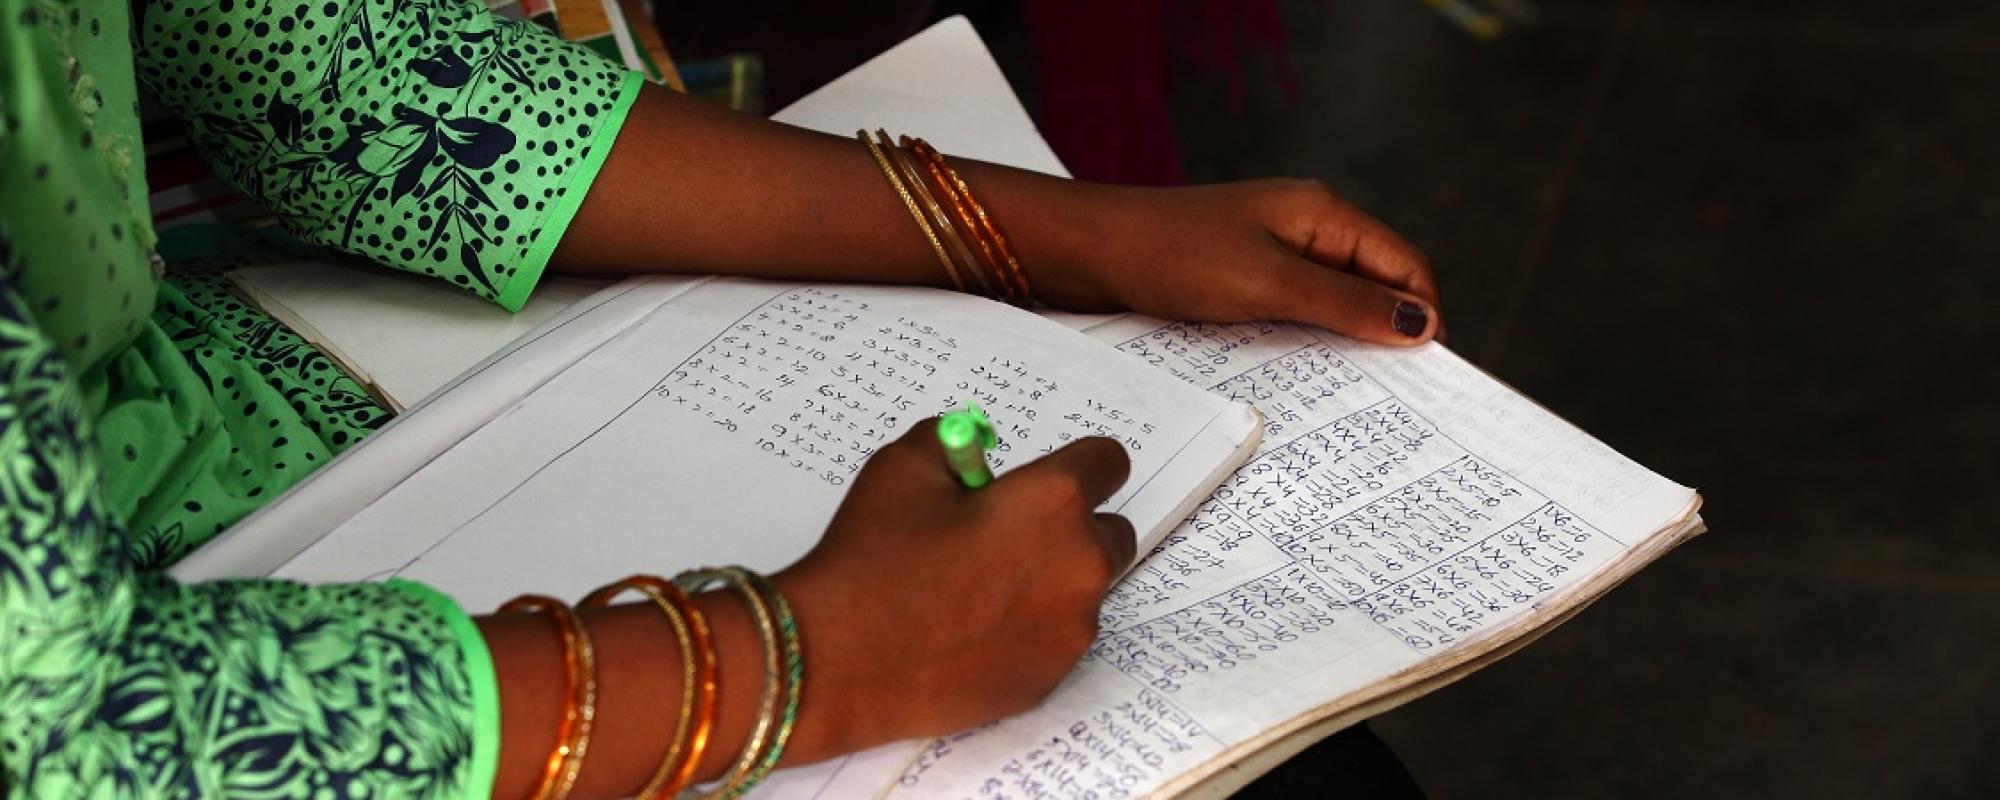 women writing out sums in a notebook